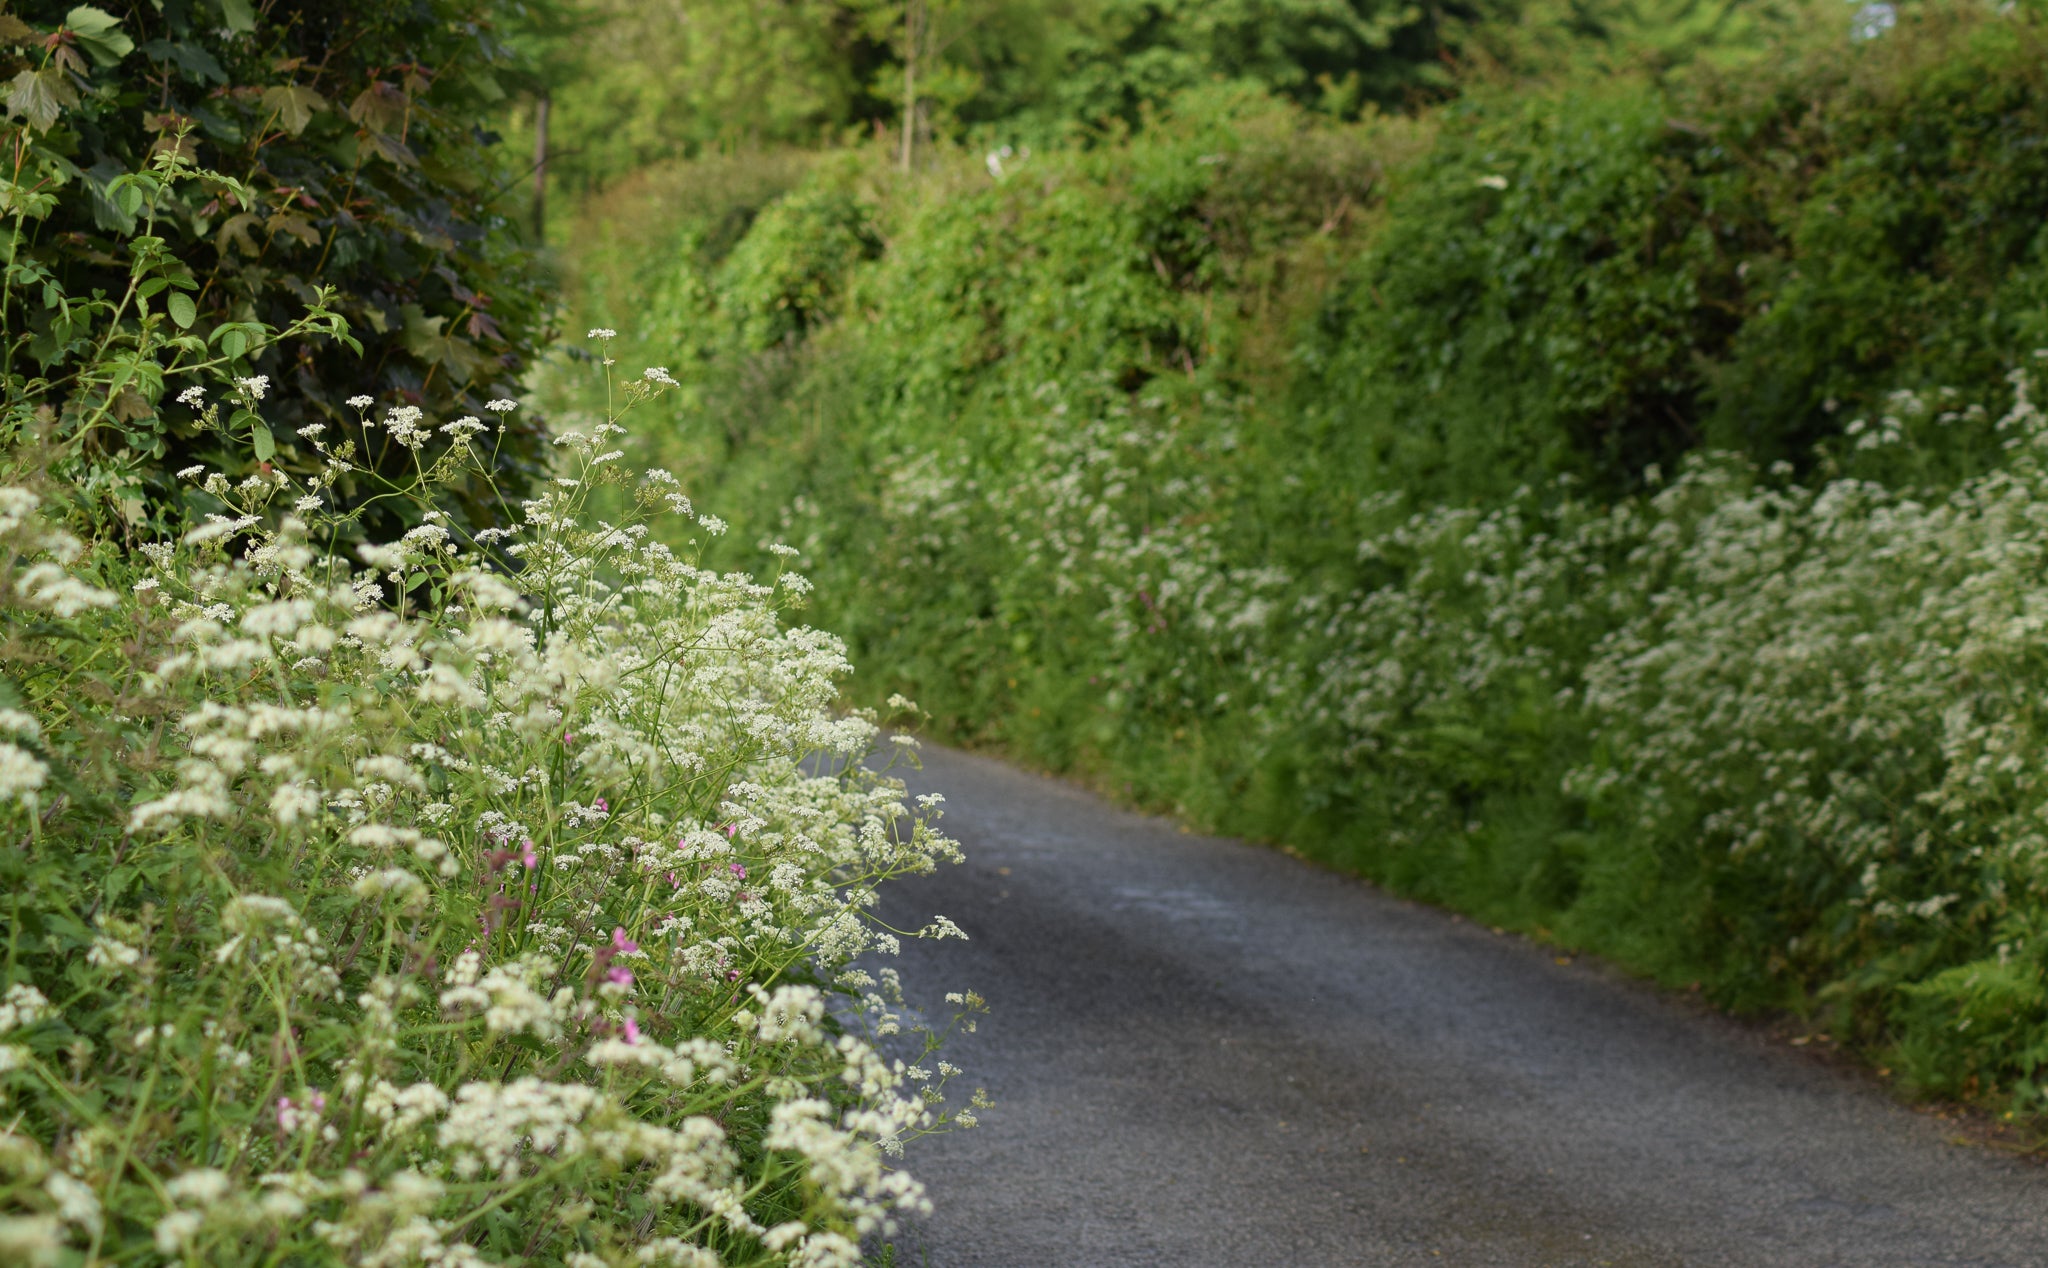 Hedgerow with cow parsley